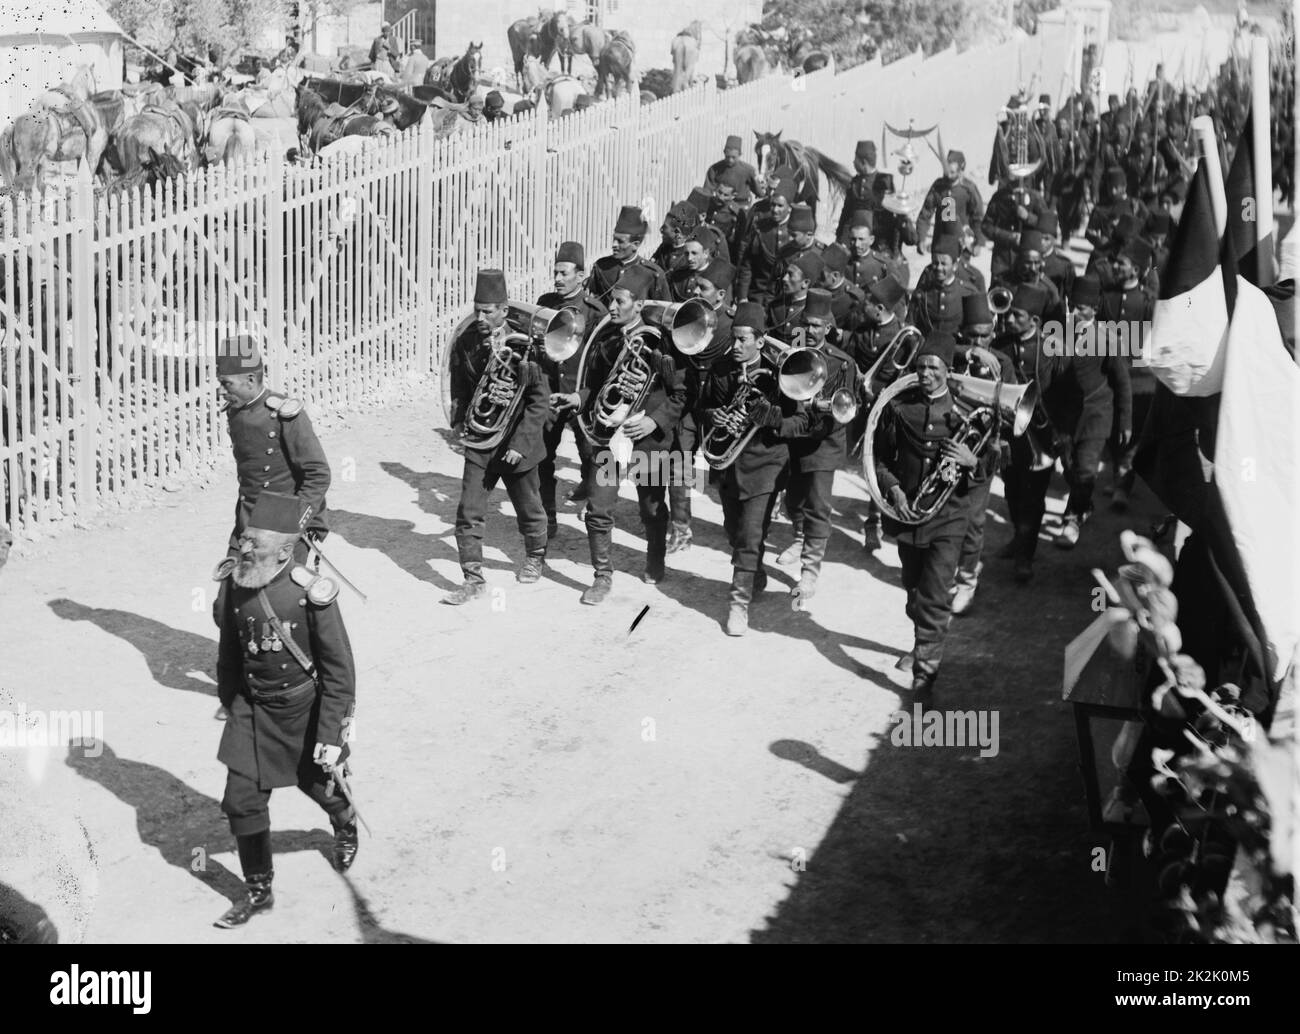 Turkish military band marching to the German camp during state visit of Wilhelm II Emperor of Germany to Jerusalem, 1898. At this date Jerusalem was still part of the declining Ottoman Empire. Music Military Instrument Brass Stock Photo